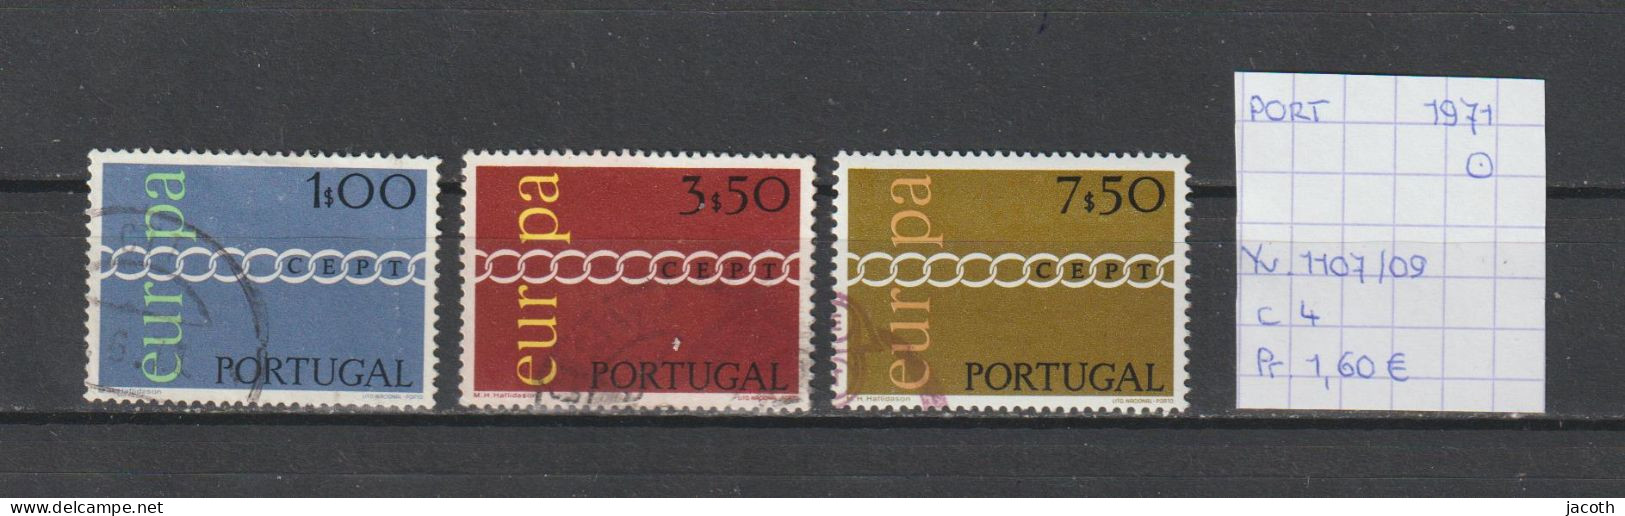 (TJ) Europa CEPT 1971 - Portugal YT 1107/09 (gest./obl./used) - 1971